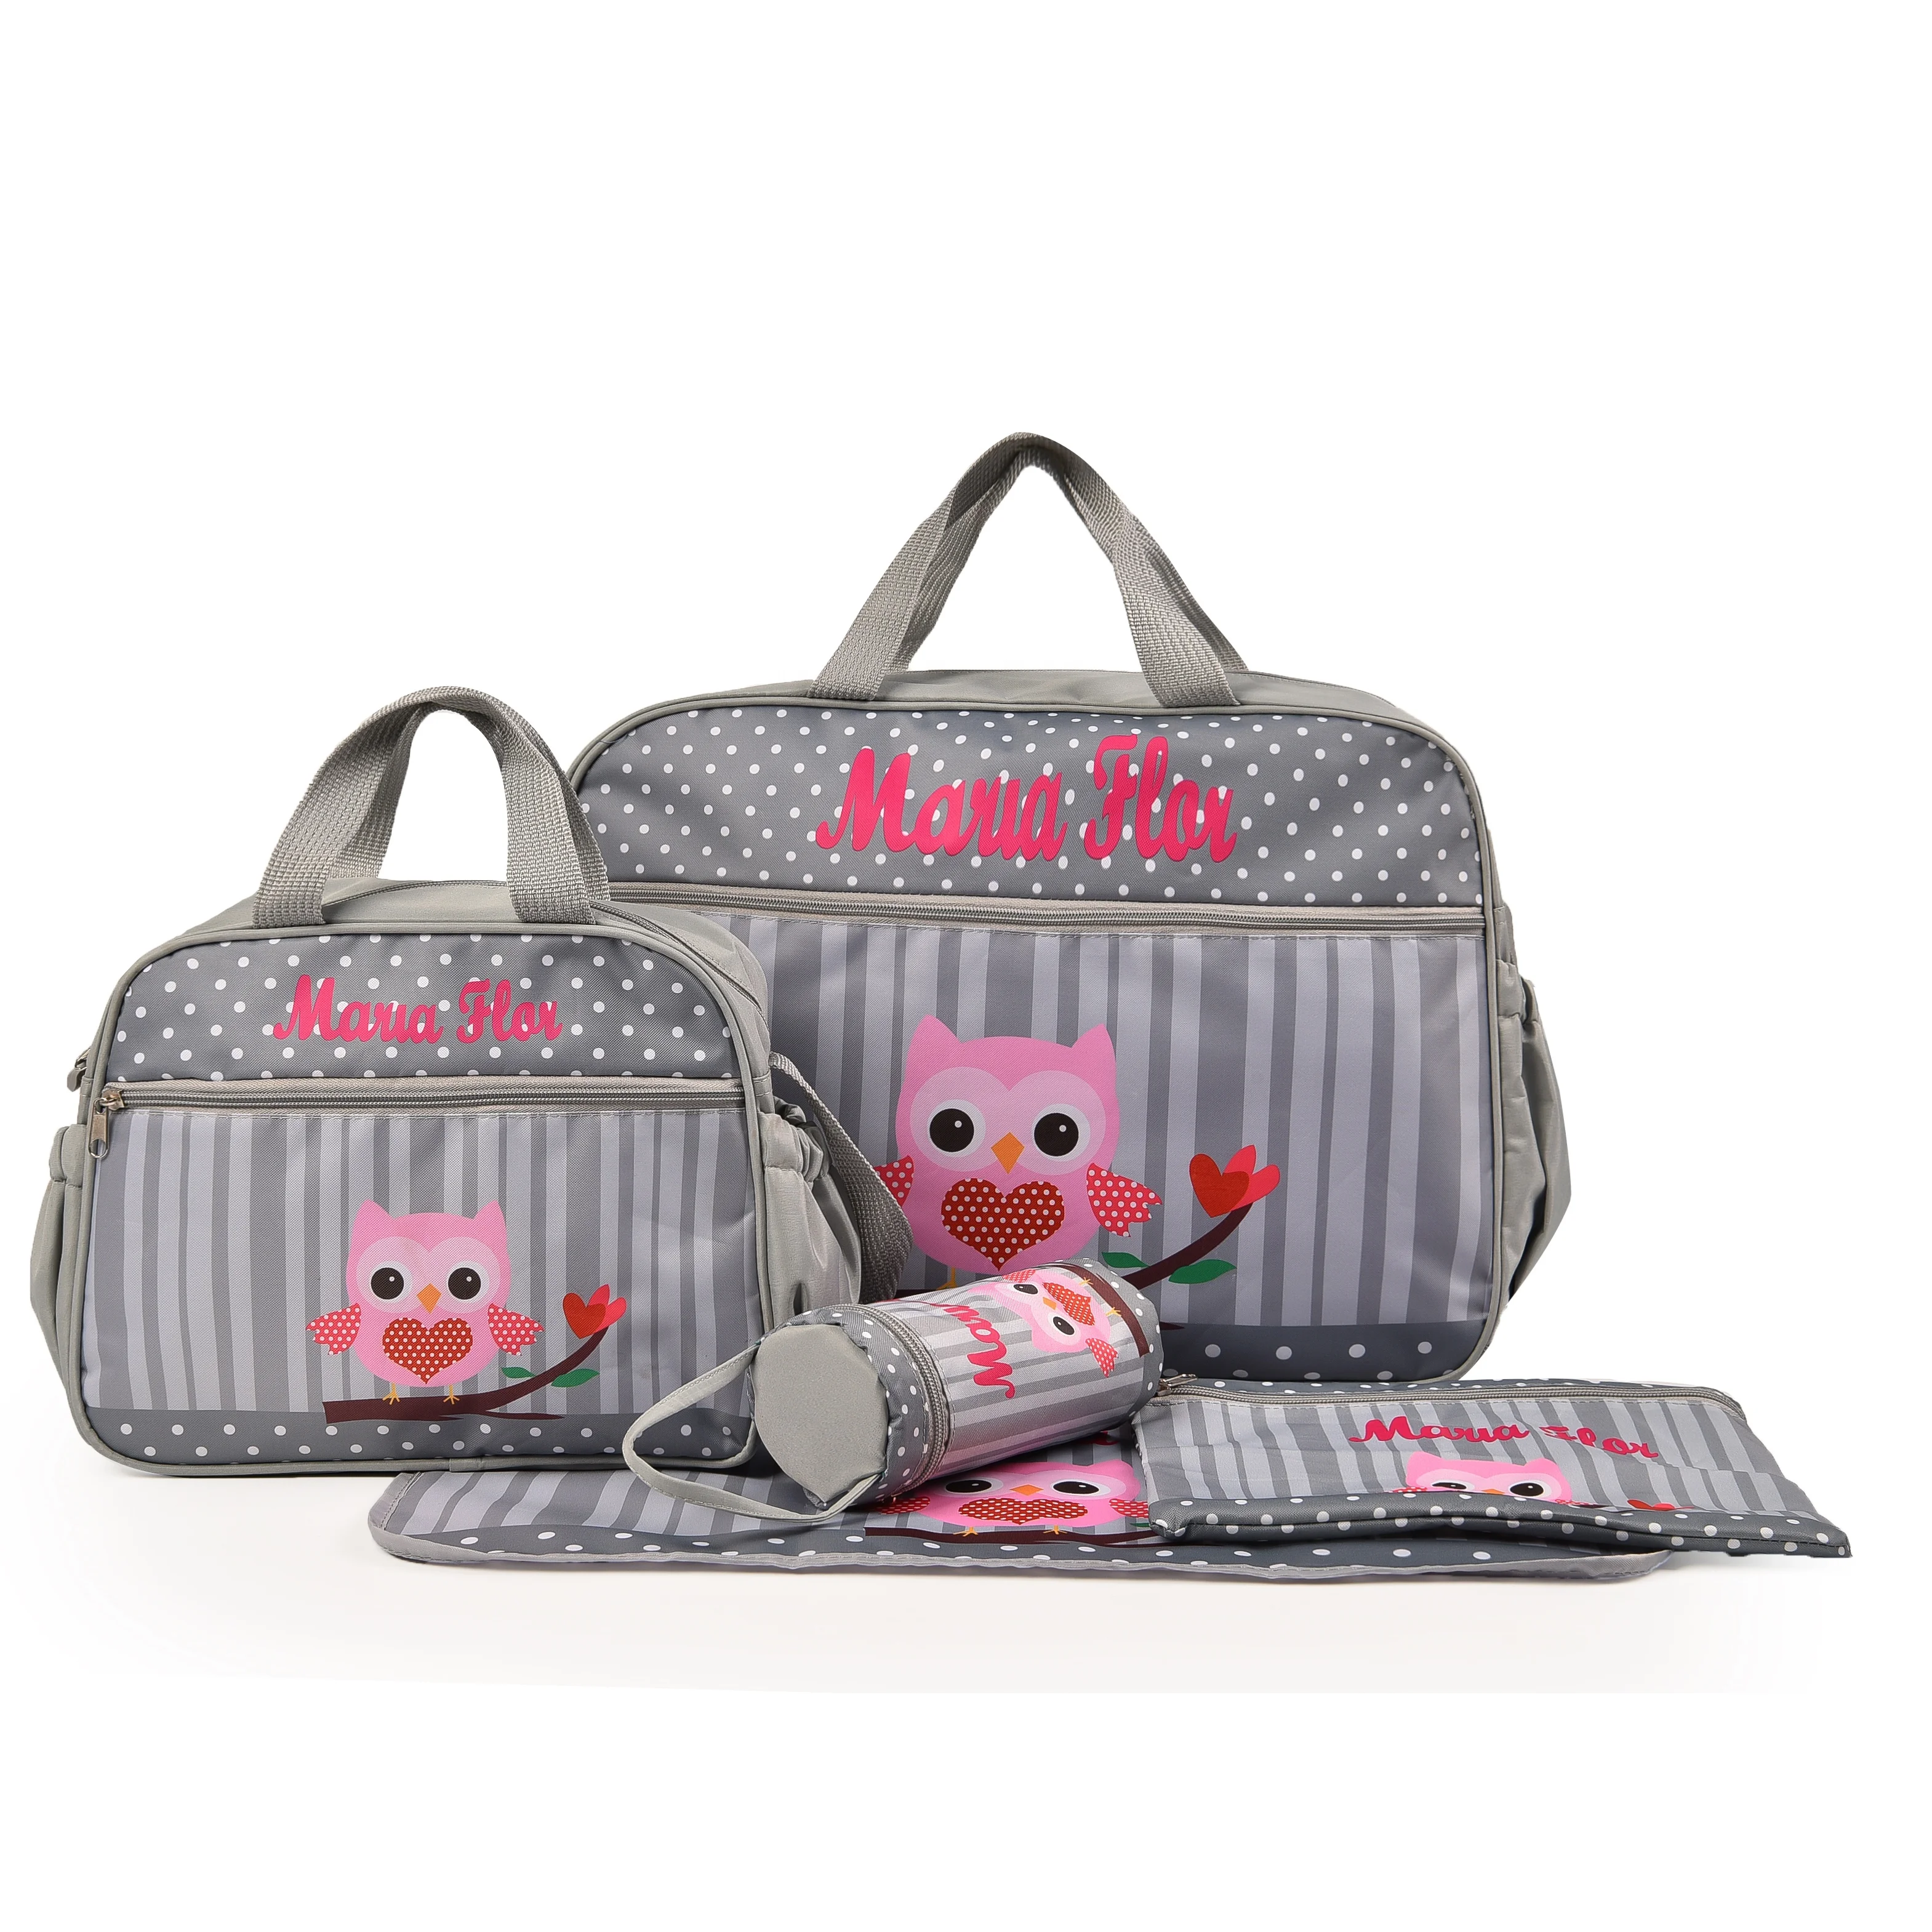 

2021 NEWEST 5pcs/set high quality tote baby shoulder diaper bags durable nappy bag mummy mother baby bag, Grey, beige